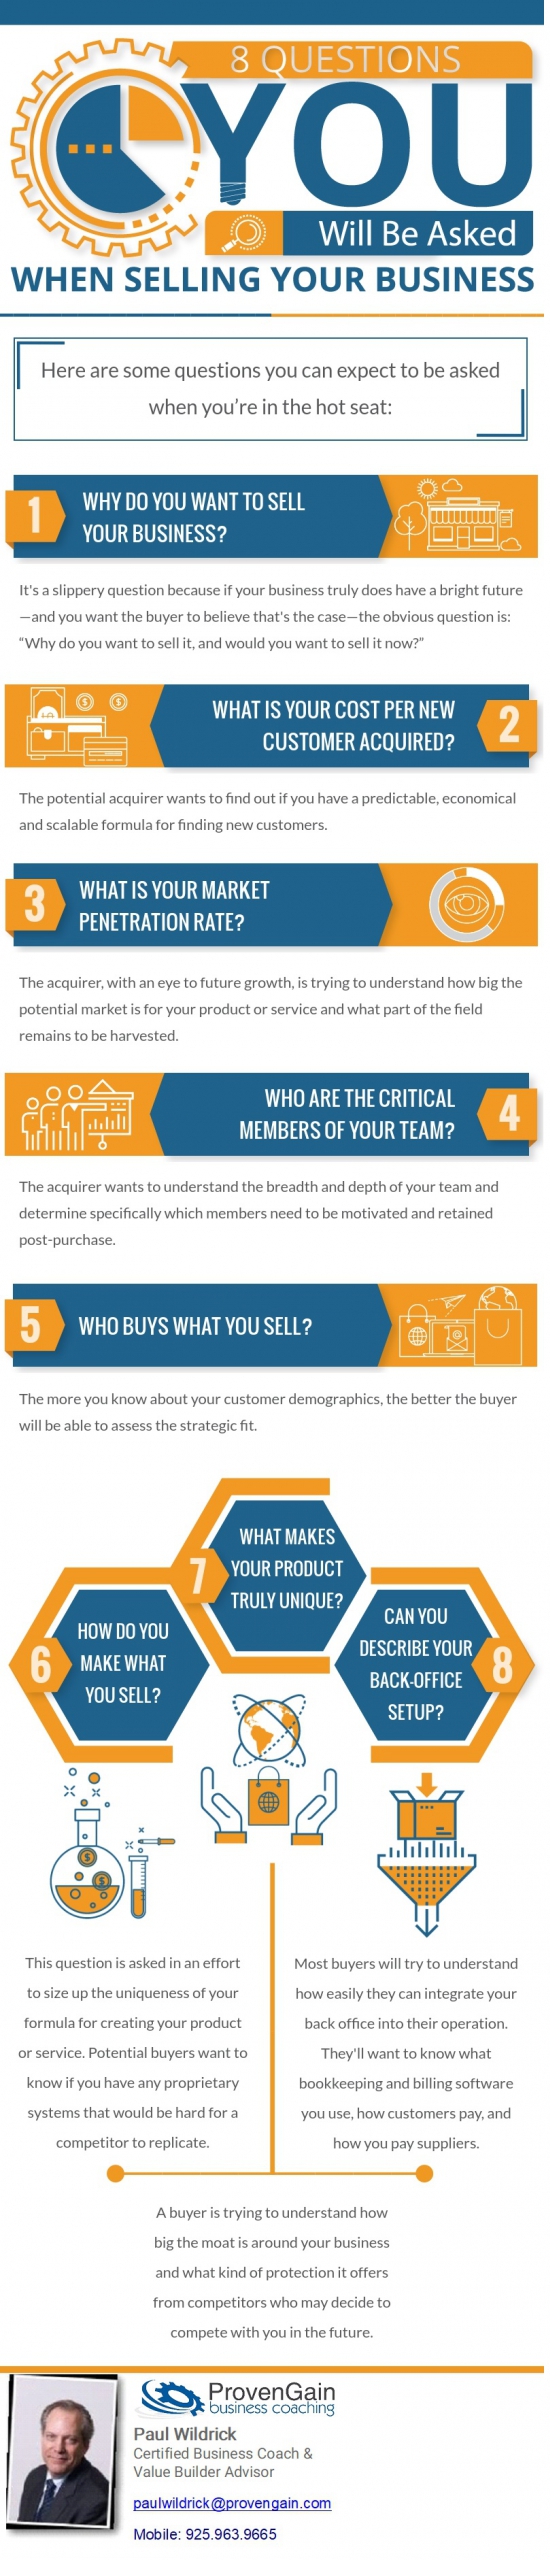 8 Questions You Will Be Asked When Selling Your Business